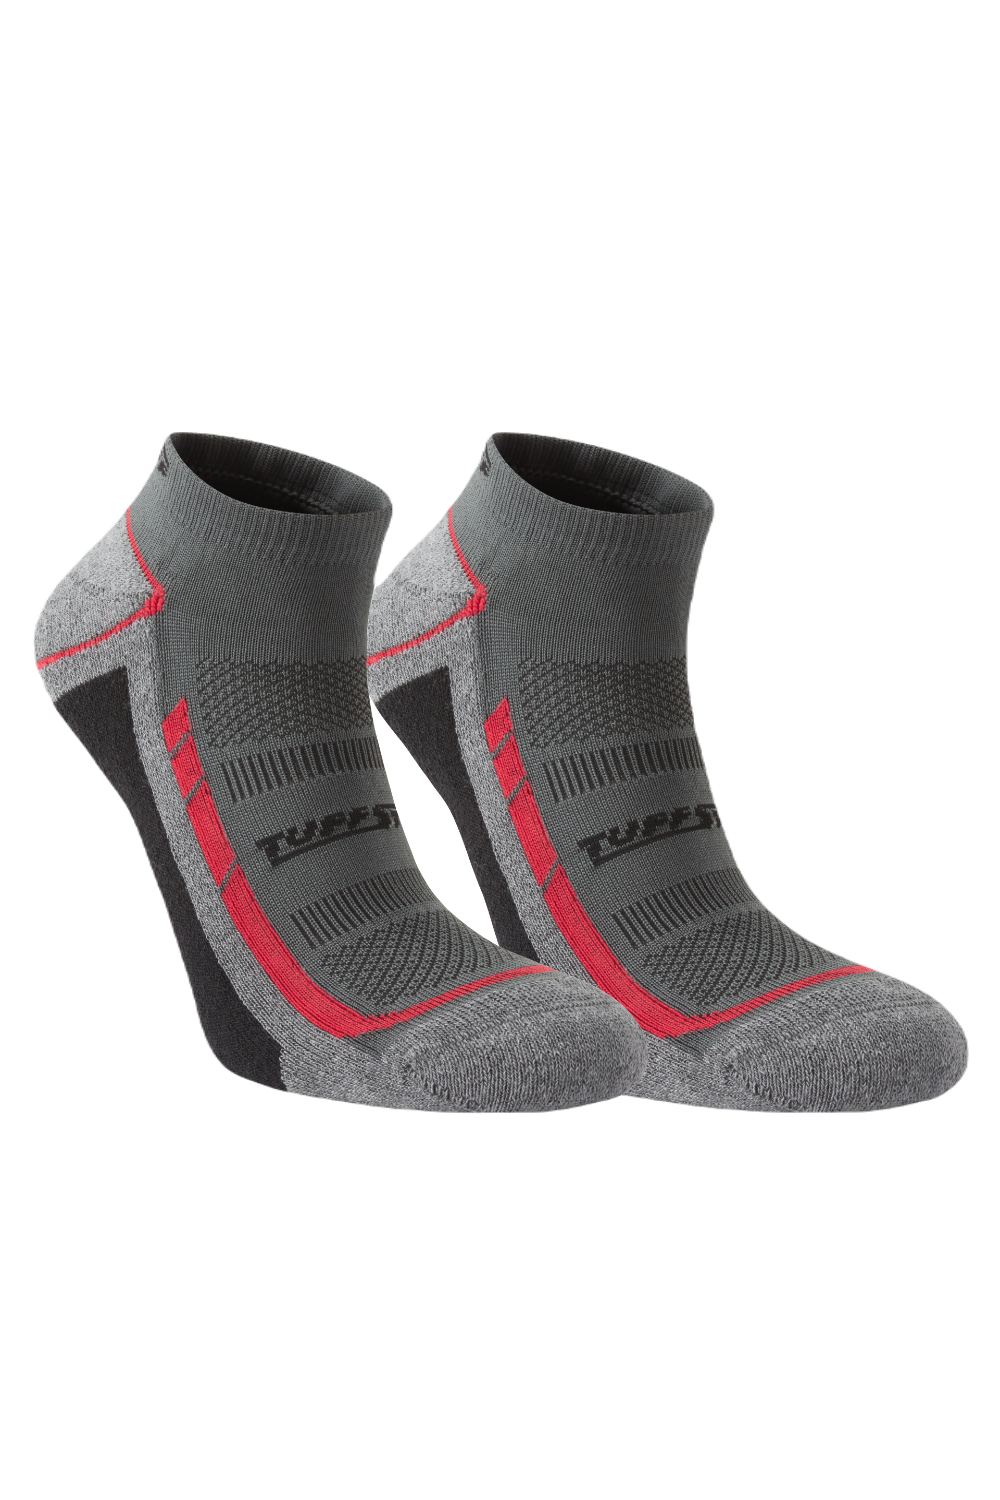 The TuffStuff Elite Low Cut Socks in Grey and Red